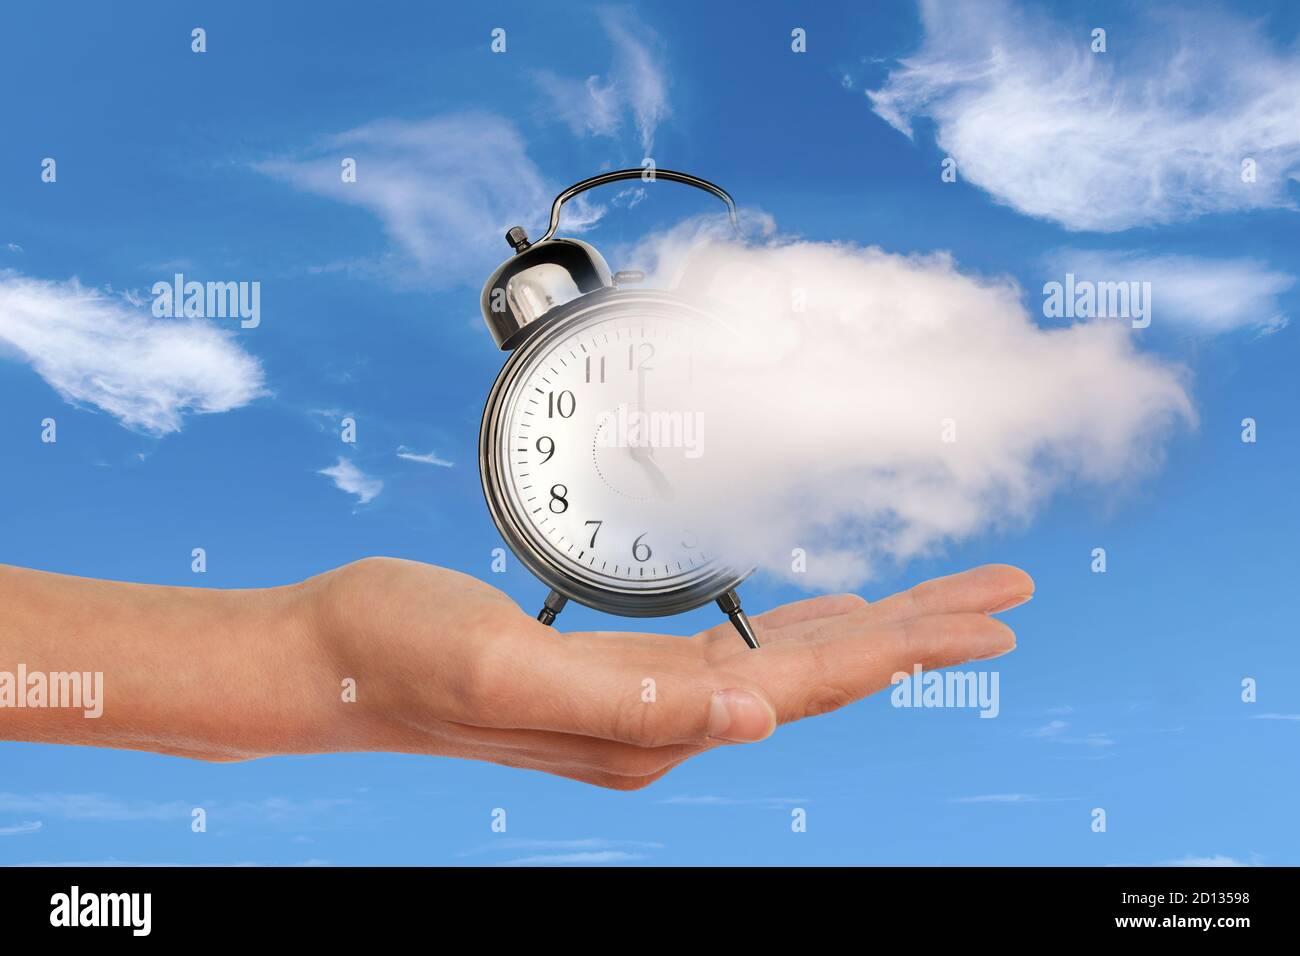 Hand holding a clock dissolving away in a cloud. Time flies, time management concept. Surreal collage. Stock Photo